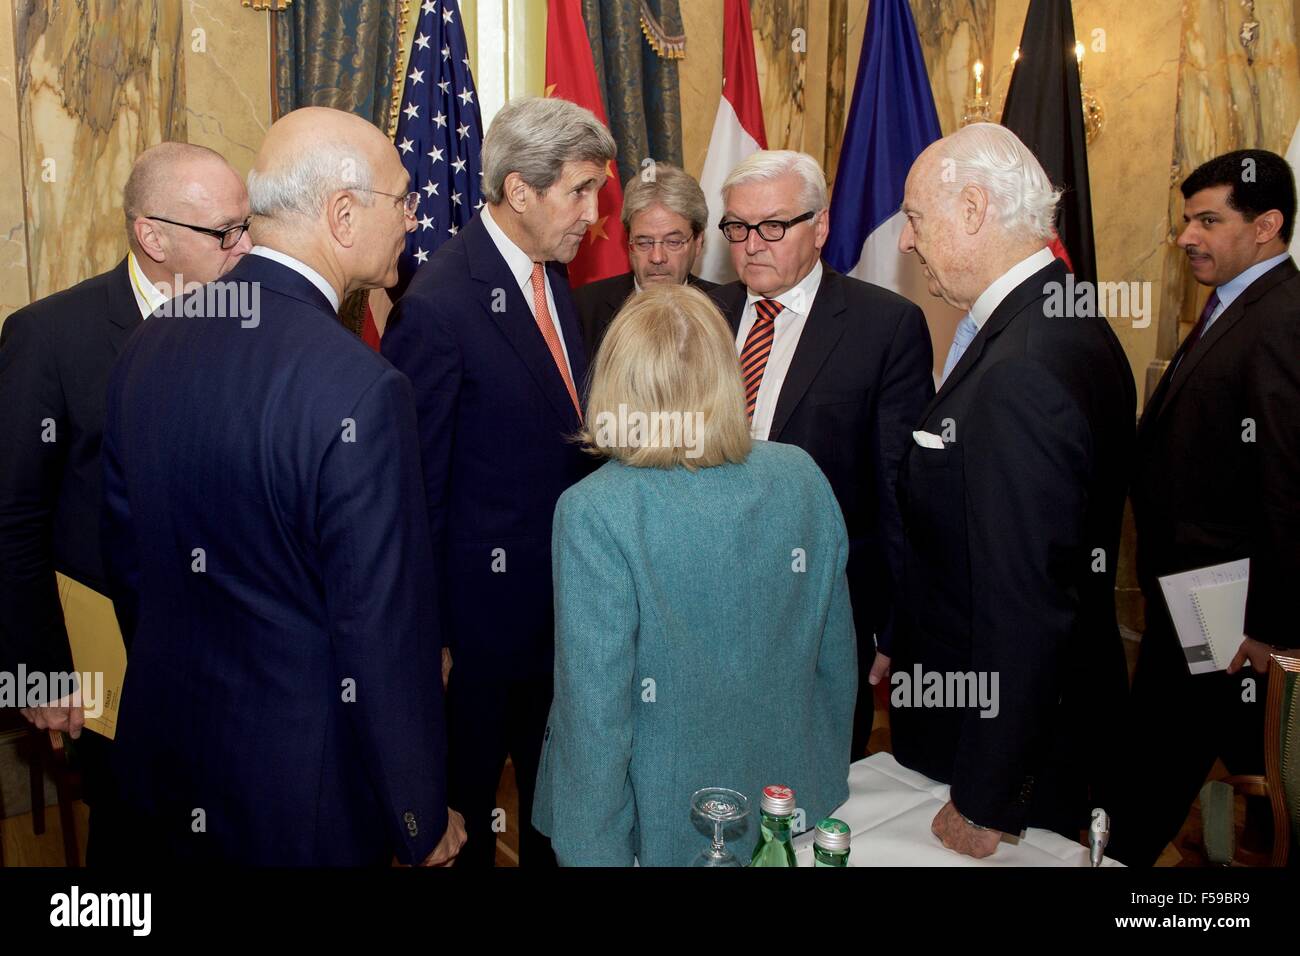 US Secretary of State John Kerry chats with German Foreign Minister Frank-Walter Steinmeier, United Nations Special Envoy for Syria Staffan de Mistura, and Assistant Secretary of State for Near Eastern Affairs Anne Patterson at the Imperial Hotel October 30, 2015 in Vienna, Austria. The gathering is to discussion ways to end the fighting in Syria. Stock Photo